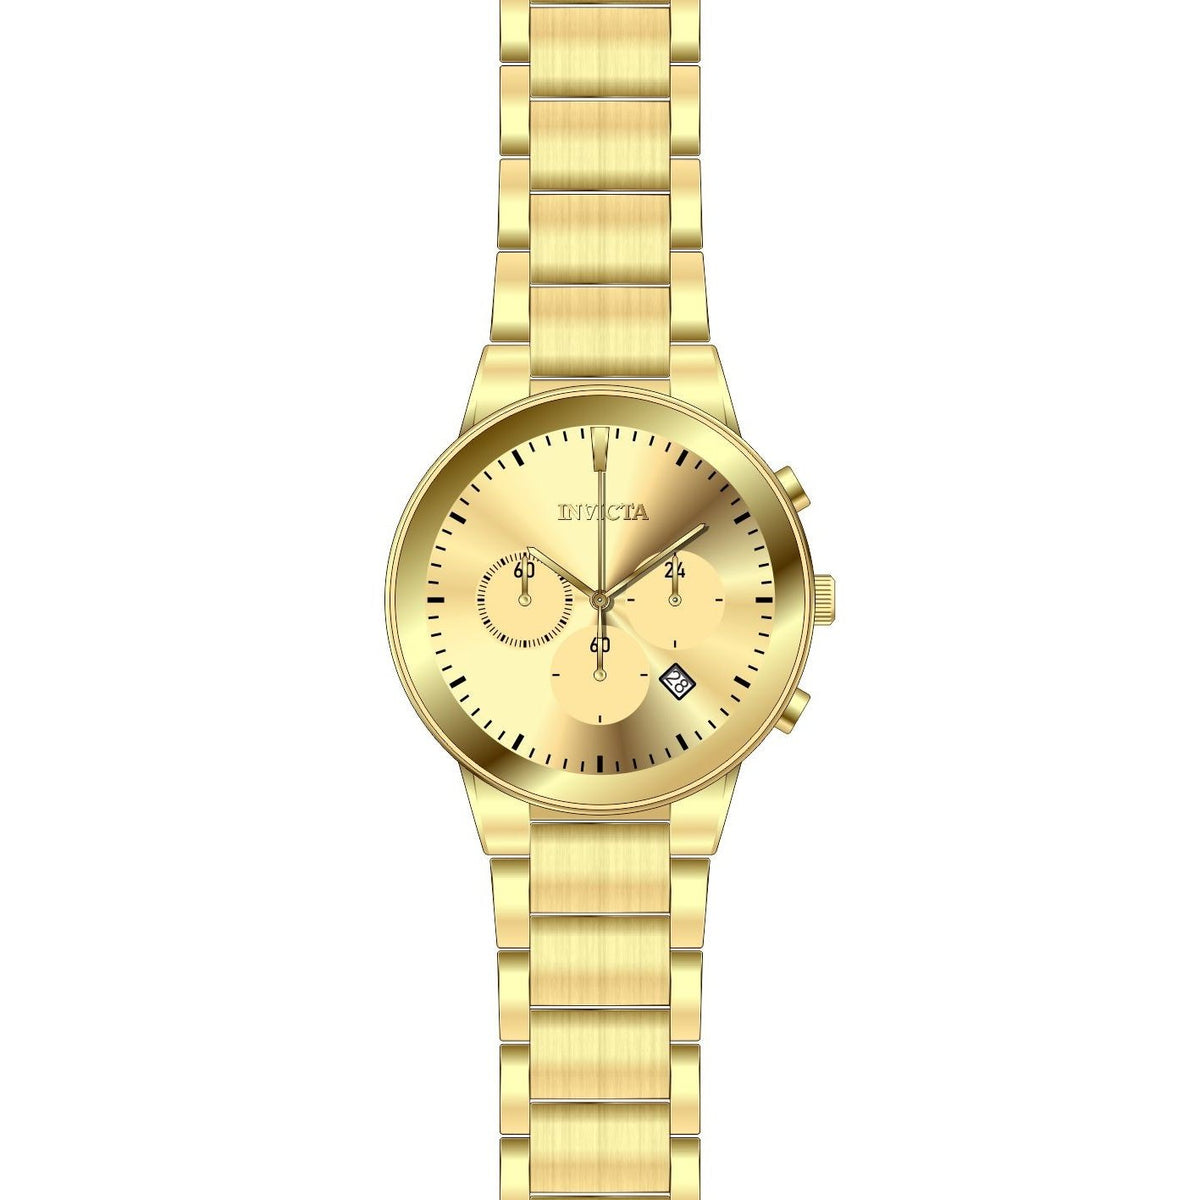 Invicta Men&#39;s 29481 Specialty Gold-Tone Stainless Steel Watch